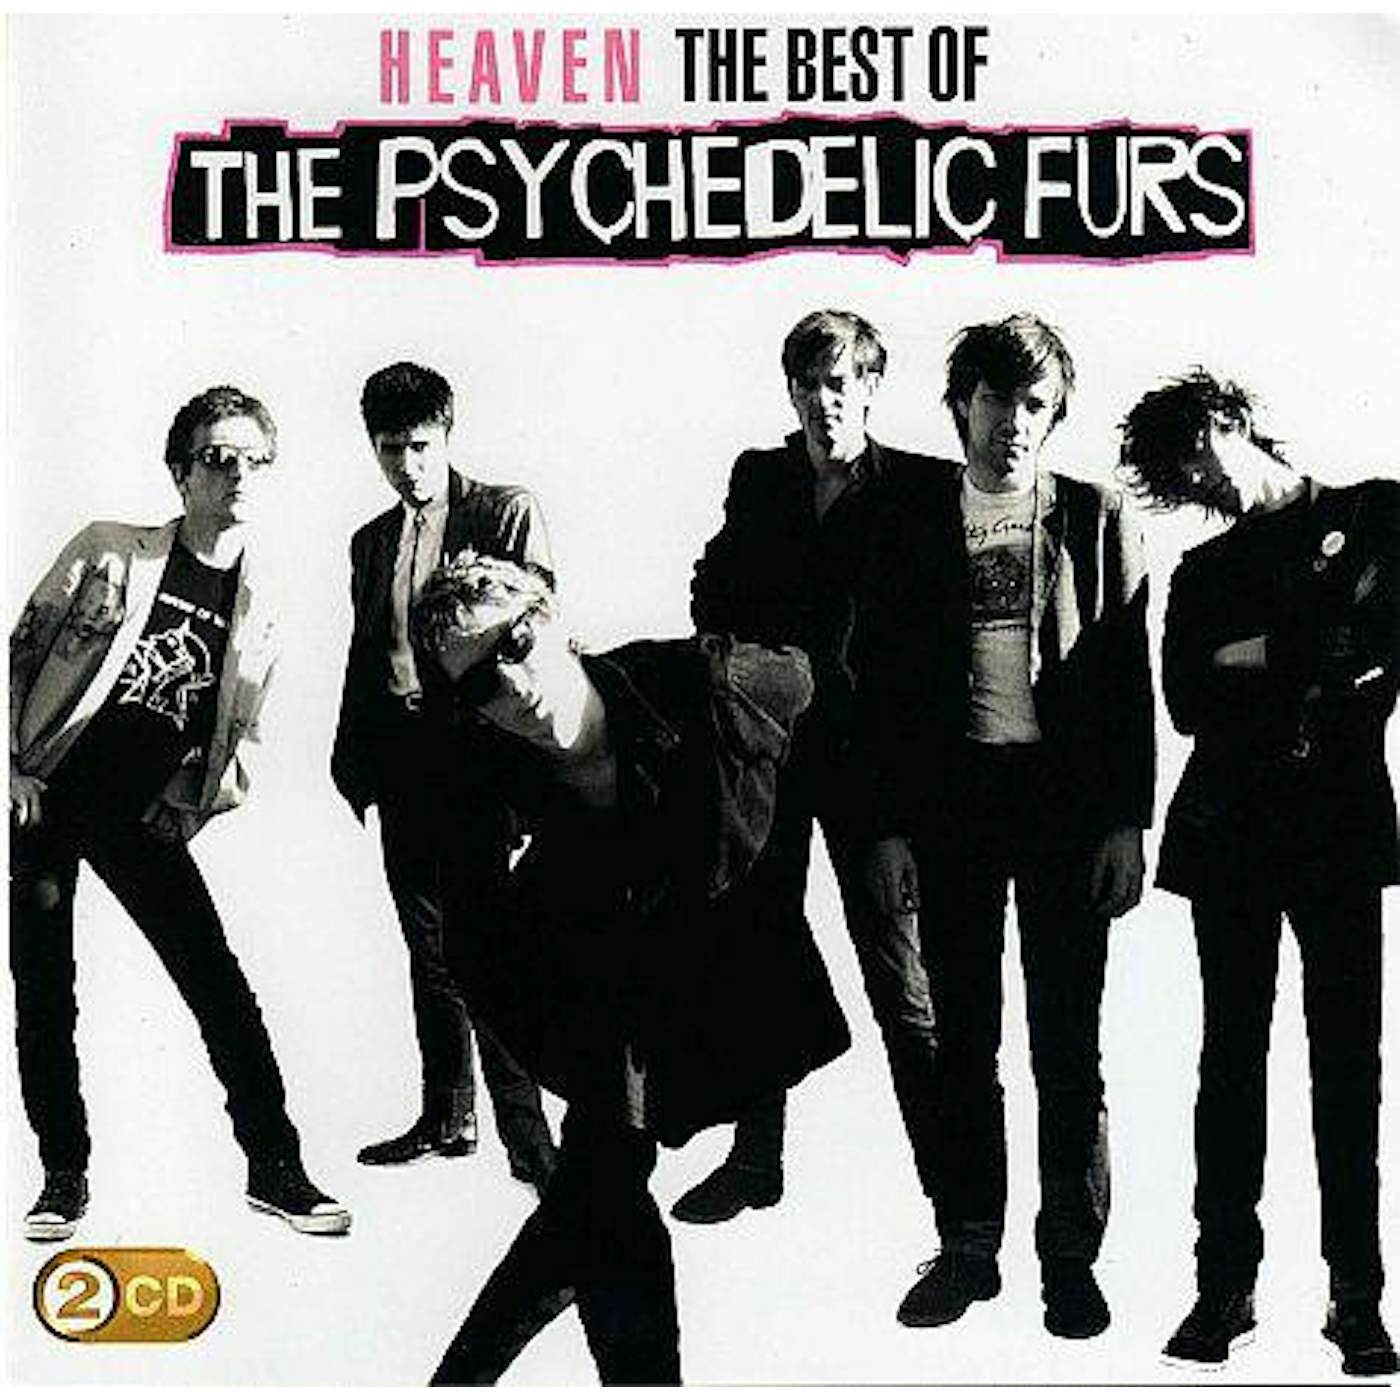 The Psychedelic Furs HEAVEN: BEST OF CD